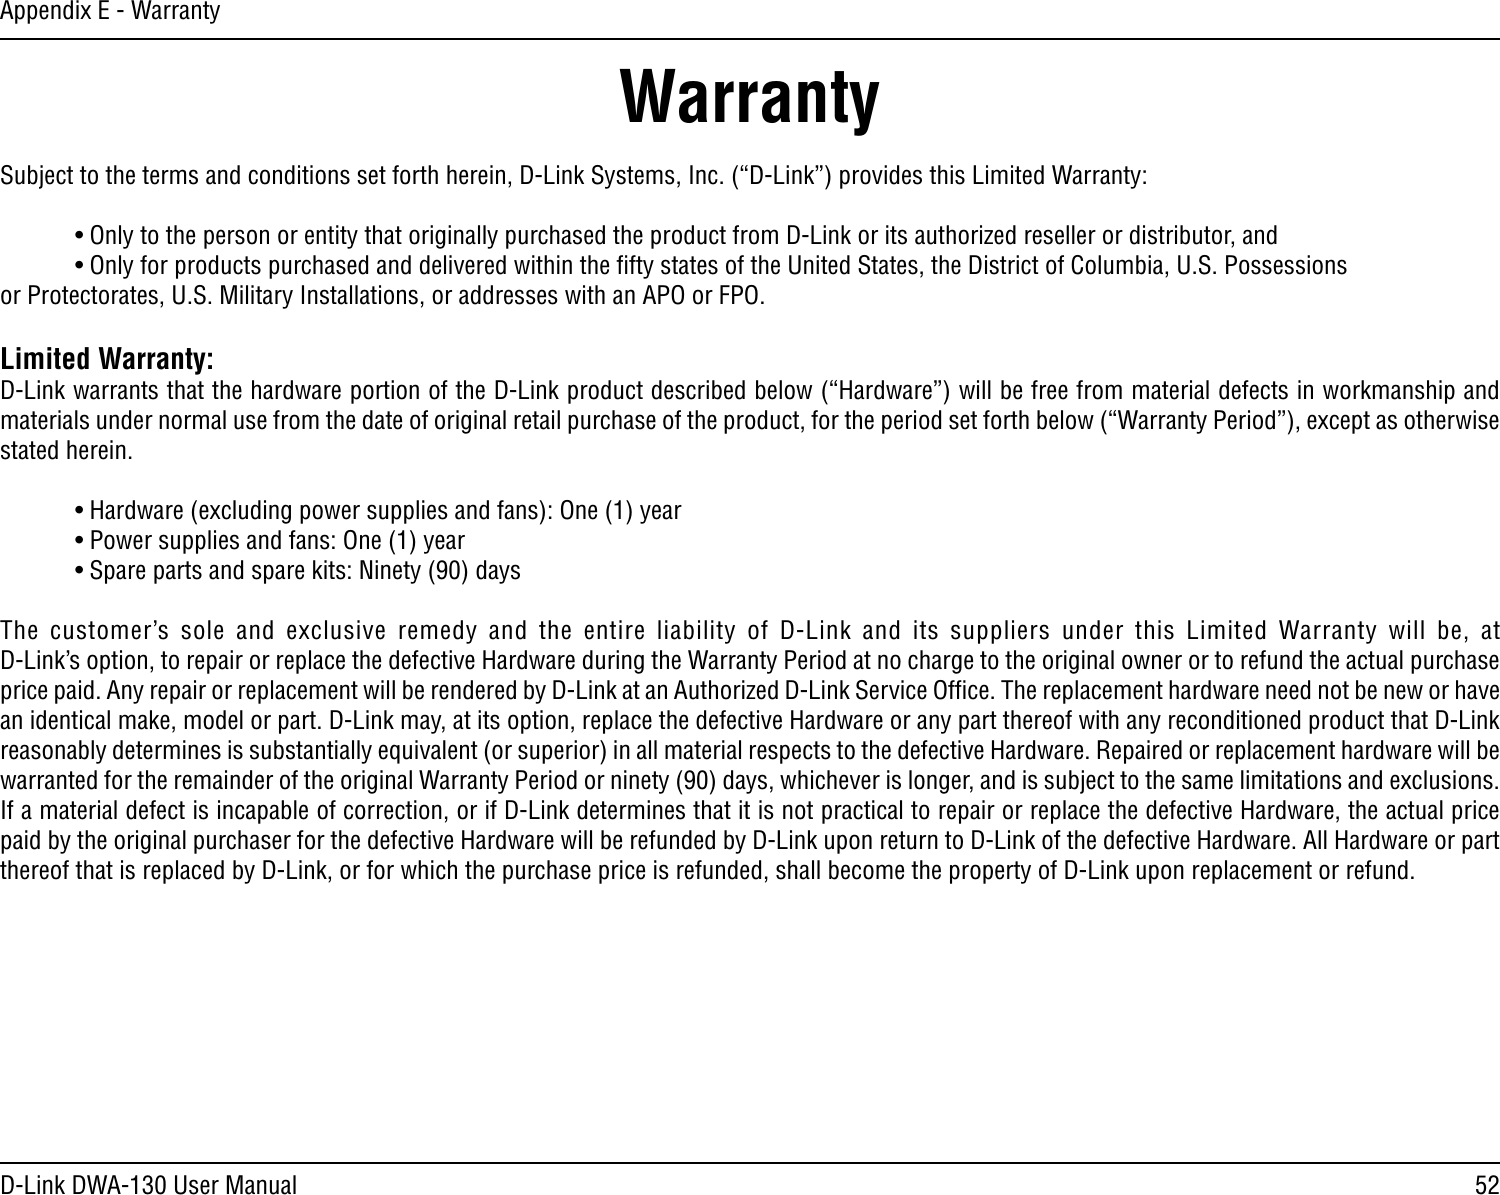 52D-Link DWA-130 User ManualAppendix E - WarrantyWarrantySubject to the terms and conditions set forth herein, D-Link Systems, Inc. (“D-Link”) provides this Limited Warranty:  • Only to the person or entity that originally purchased the product from D-Link or its authorized reseller or distributor, and  • Only for products purchased and delivered within the ﬁfty states of the United States, the District of Columbia, U.S. Possessions       or Protectorates, U.S. Military Installations, or addresses with an APO or FPO.Limited Warranty:D-Link warrants that the hardware portion of the D-Link product described below (“Hardware”) will be free from material defects in workmanship and materials under normal use from the date of original retail purchase of the product, for the period set forth below (“Warranty Period”), except as otherwise stated herein.  • Hardware (excluding power supplies and fans): One (1) year  • Power supplies and fans: One (1) year  • Spare parts and spare kits: Ninety (90) daysThe  customer’s  sole  and  exclusive  remedy  and  the  entire  liability  of  D-Link  and  its  suppliers under  this  Limited  Warranty will  be,  at  D-Link’s option, to repair or replace the defective Hardware during the Warranty Period at no charge to the original owner or to refund the actual purchase price paid. Any repair or replacement will be rendered by D-Link at an Authorized D-Link Service Ofﬁce. The replacement hardware need not be new or have an identical make, model or part. D-Link may, at its option, replace the defective Hardware or any part thereof with any reconditioned product that D-Link reasonably determines is substantially equivalent (or superior) in all material respects to the defective Hardware. Repaired or replacement hardware will be warranted for the remainder of the original Warranty Period or ninety (90) days, whichever is longer, and is subject to the same limitations and exclusions. If a material defect is incapable of correction, or if D-Link determines that it is not practical to repair or replace the defective Hardware, the actual price paid by the original purchaser for the defective Hardware will be refunded by D-Link upon return to D-Link of the defective Hardware. All Hardware or part thereof that is replaced by D-Link, or for which the purchase price is refunded, shall become the property of D-Link upon replacement or refund.